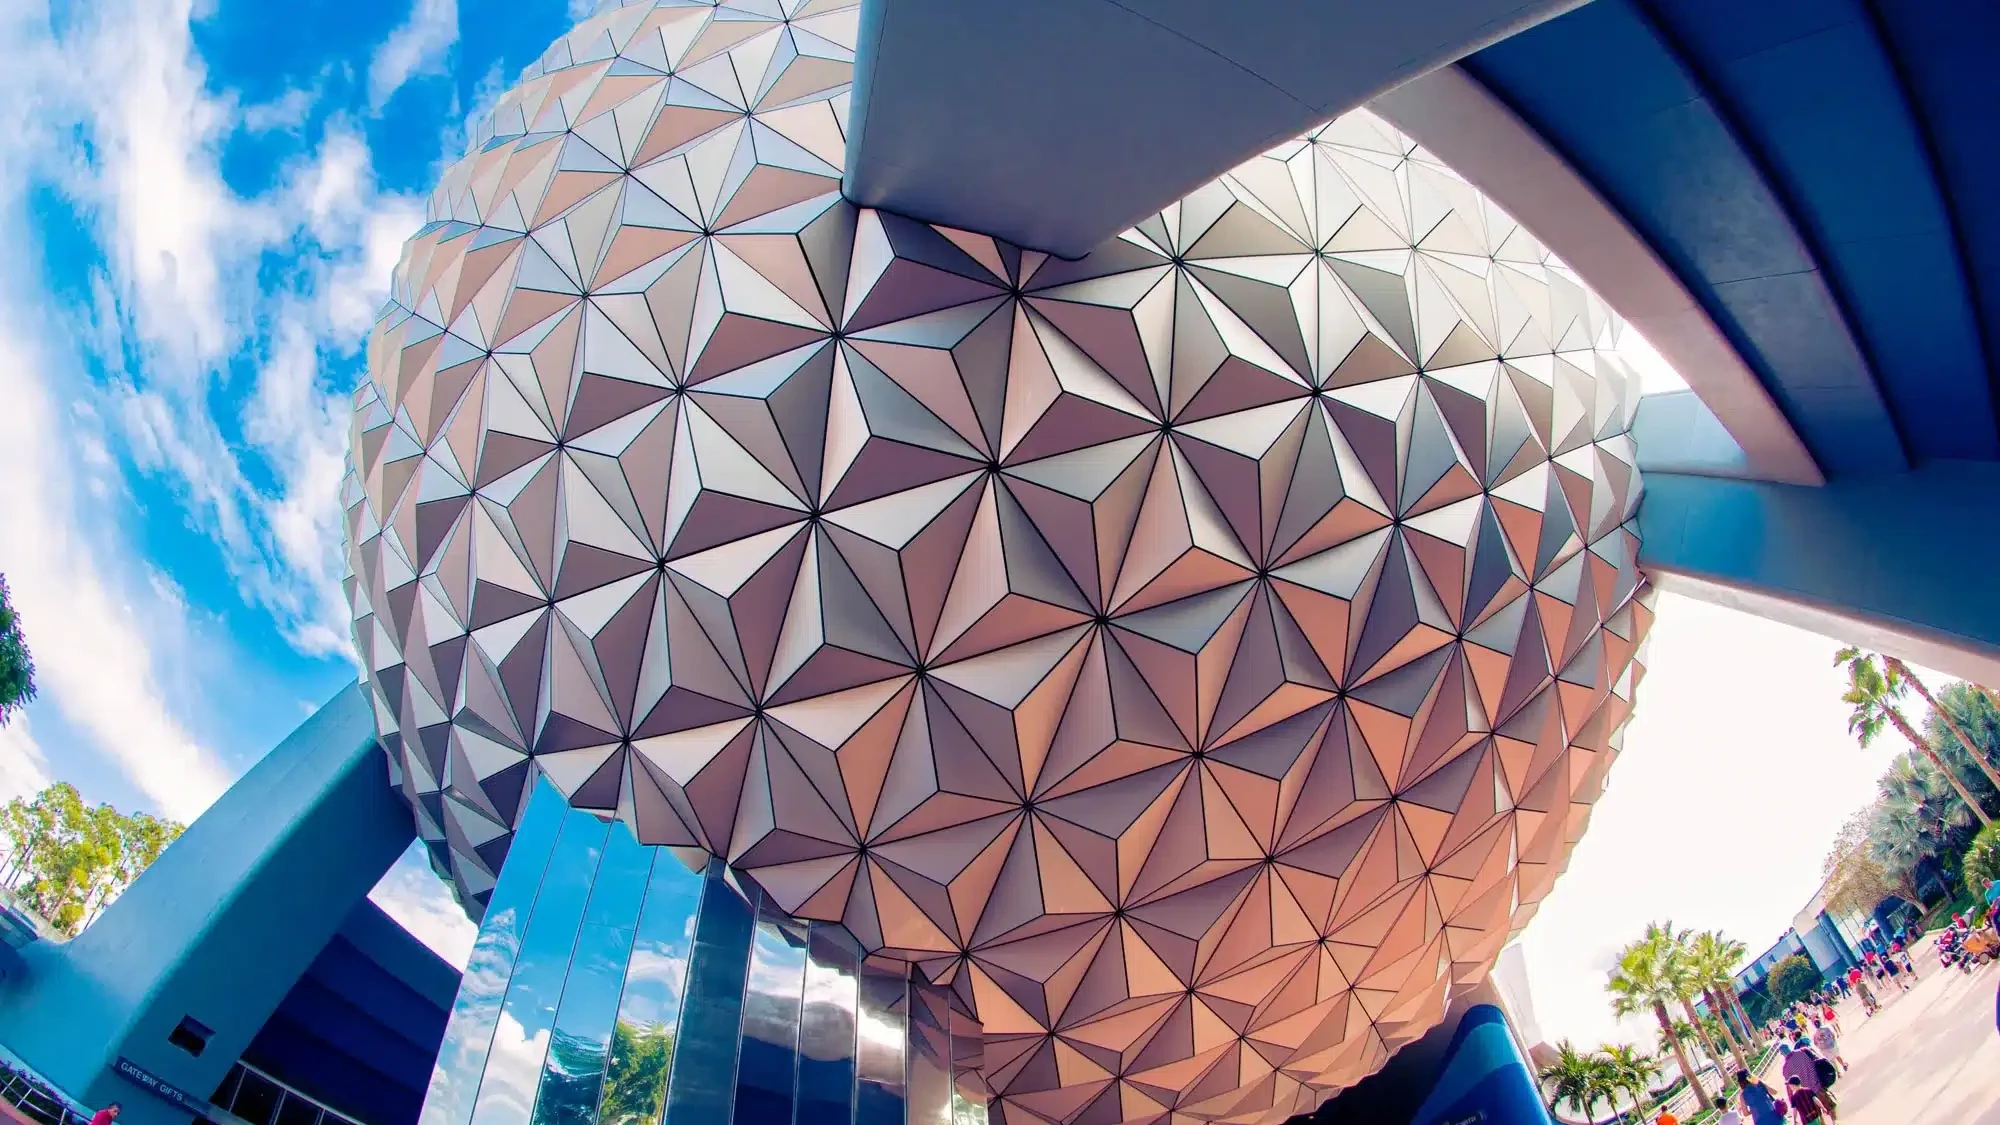 Spaceship Earth at EPCOT - Disney World - Guide2WDW